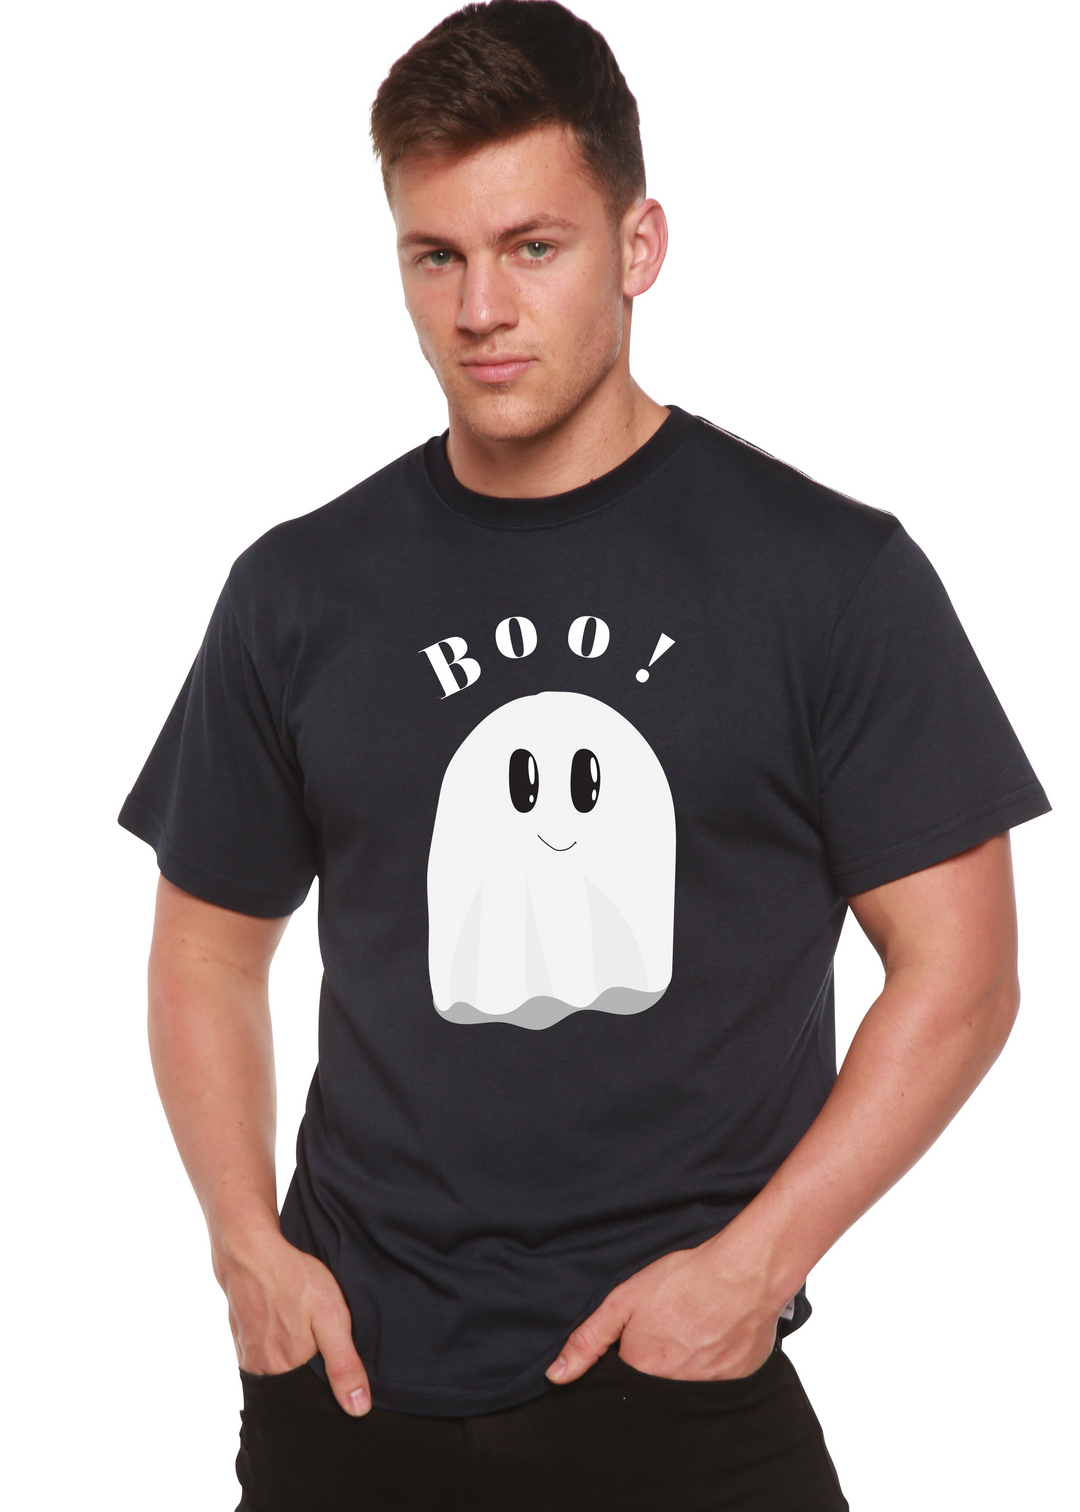 Boo Graphic Bamboo T-Shirt navy blue